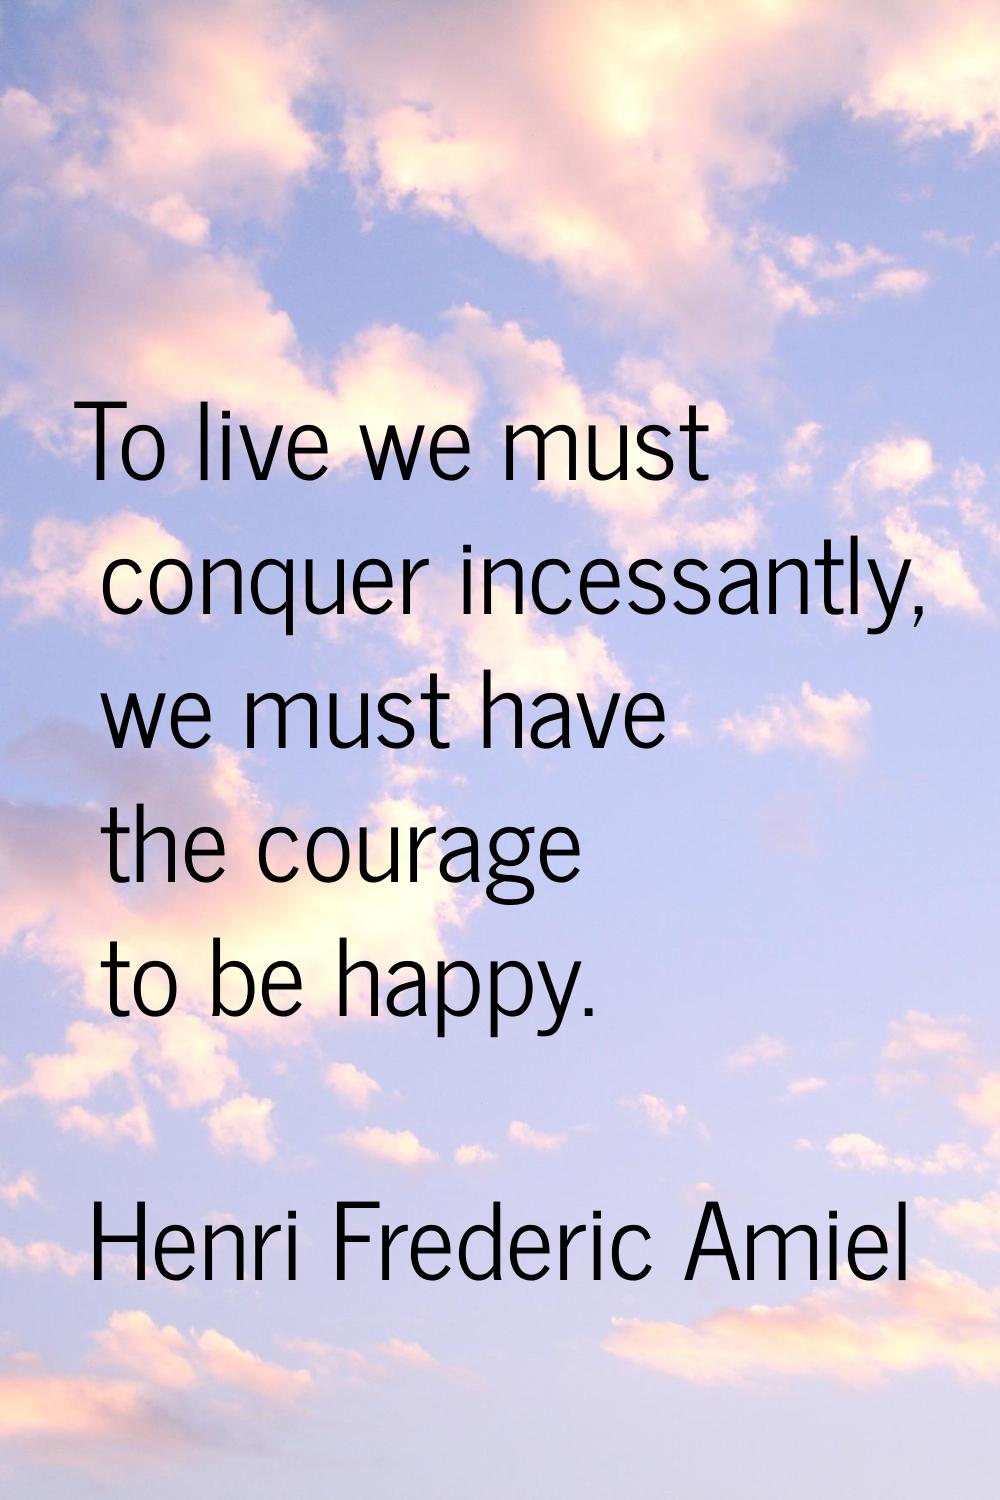 To live we must conquer incessantly, we must have the courage to be happy.